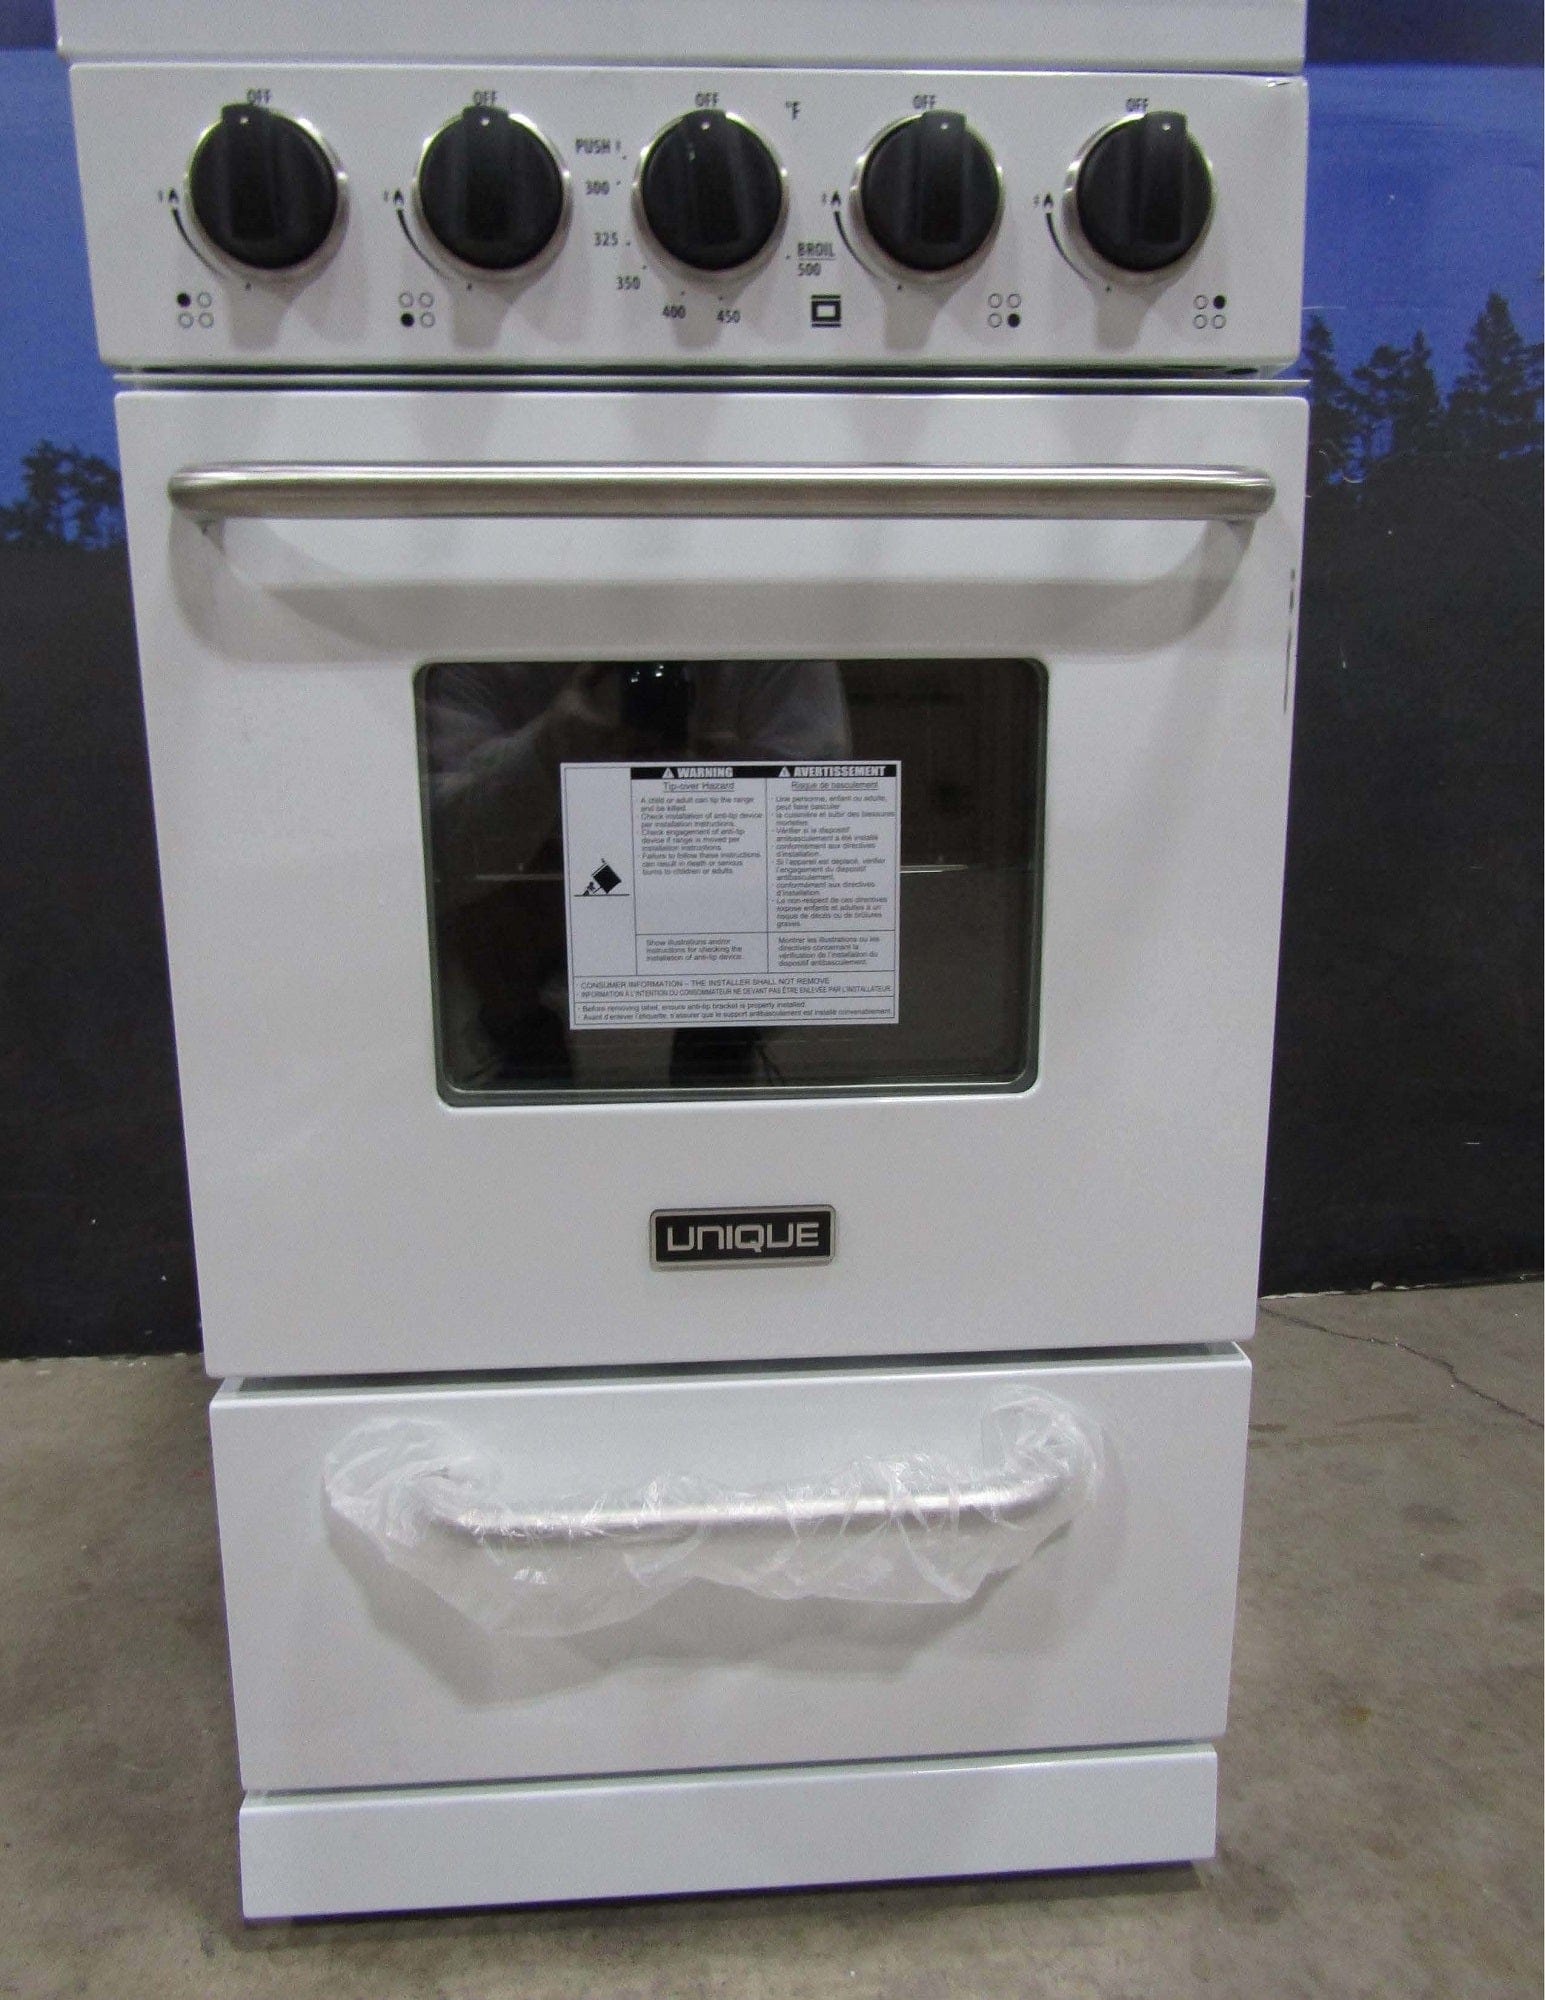 Unique Scratch and Dent or Pre-Owned Off-Grid Appliances New Scratch & Dent Unique Classic 20" Propane Range. Battery Ignition.  Variable BTU sealed burners.  Cast iron grates. Window. UGP-20G OF1 W Serial #3004246